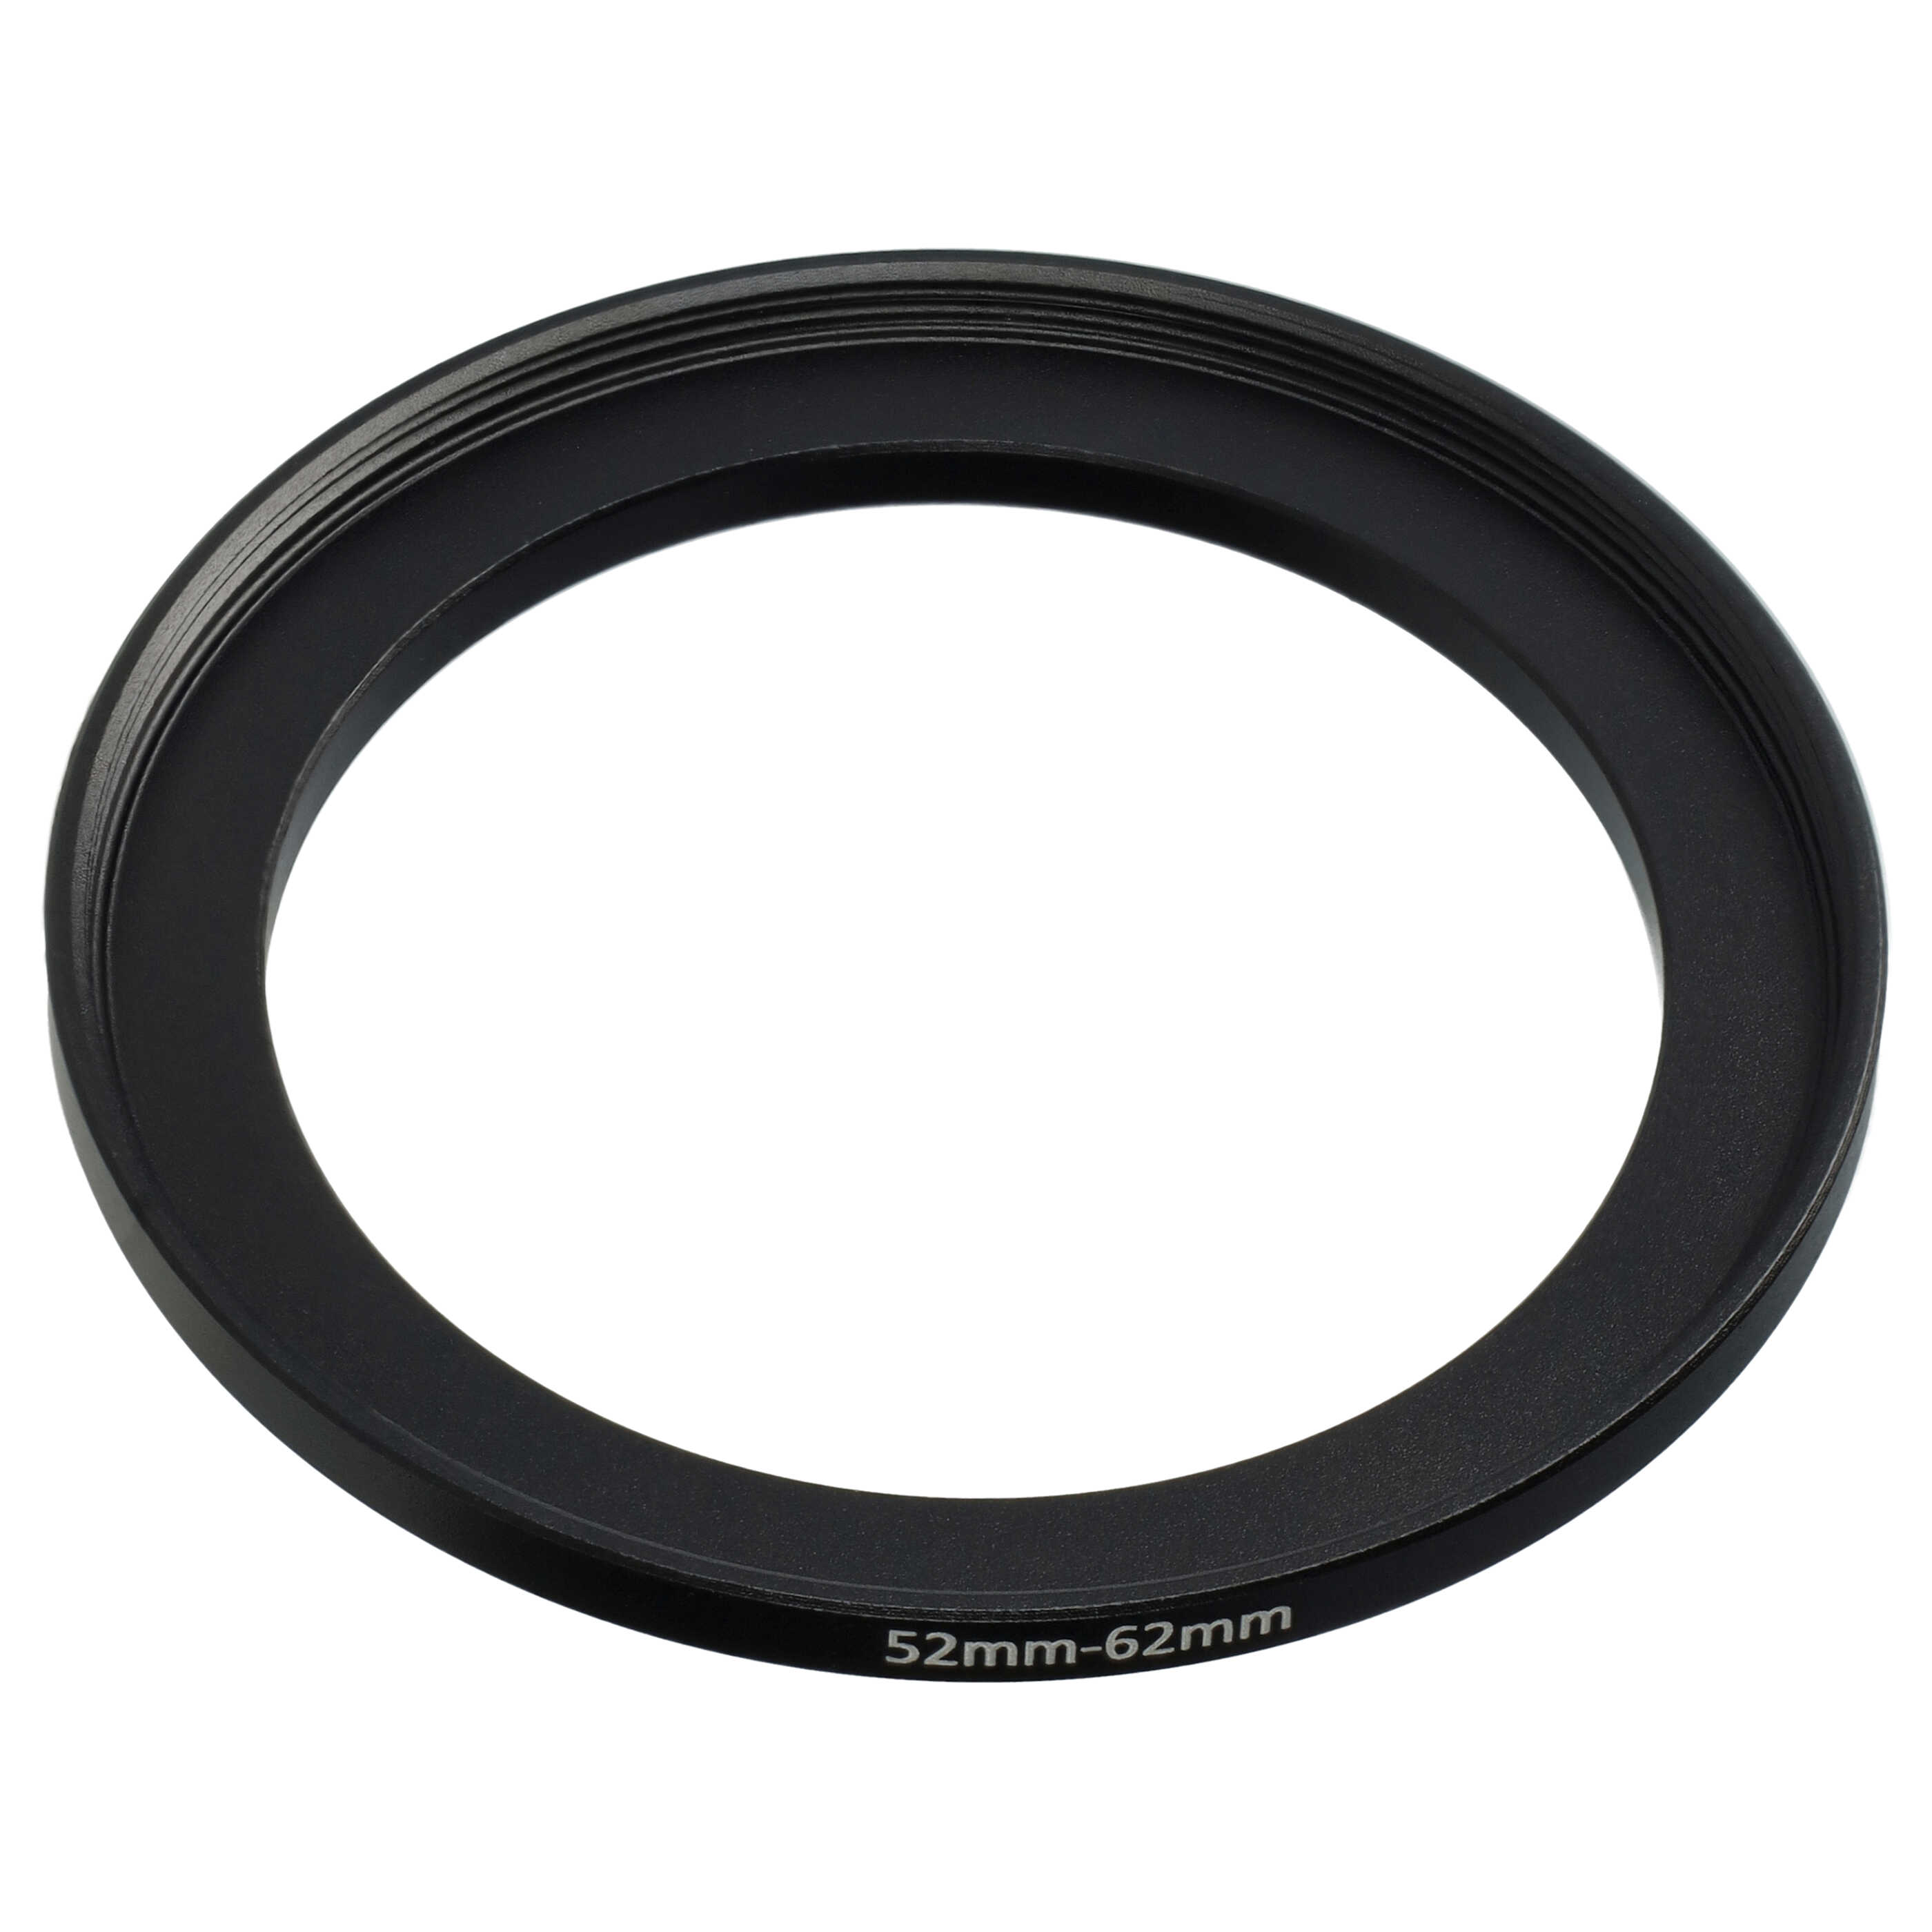 Step-Up Ring Adapter of 52 mm to 62 mmfor various Camera Lens - Filter Adapter